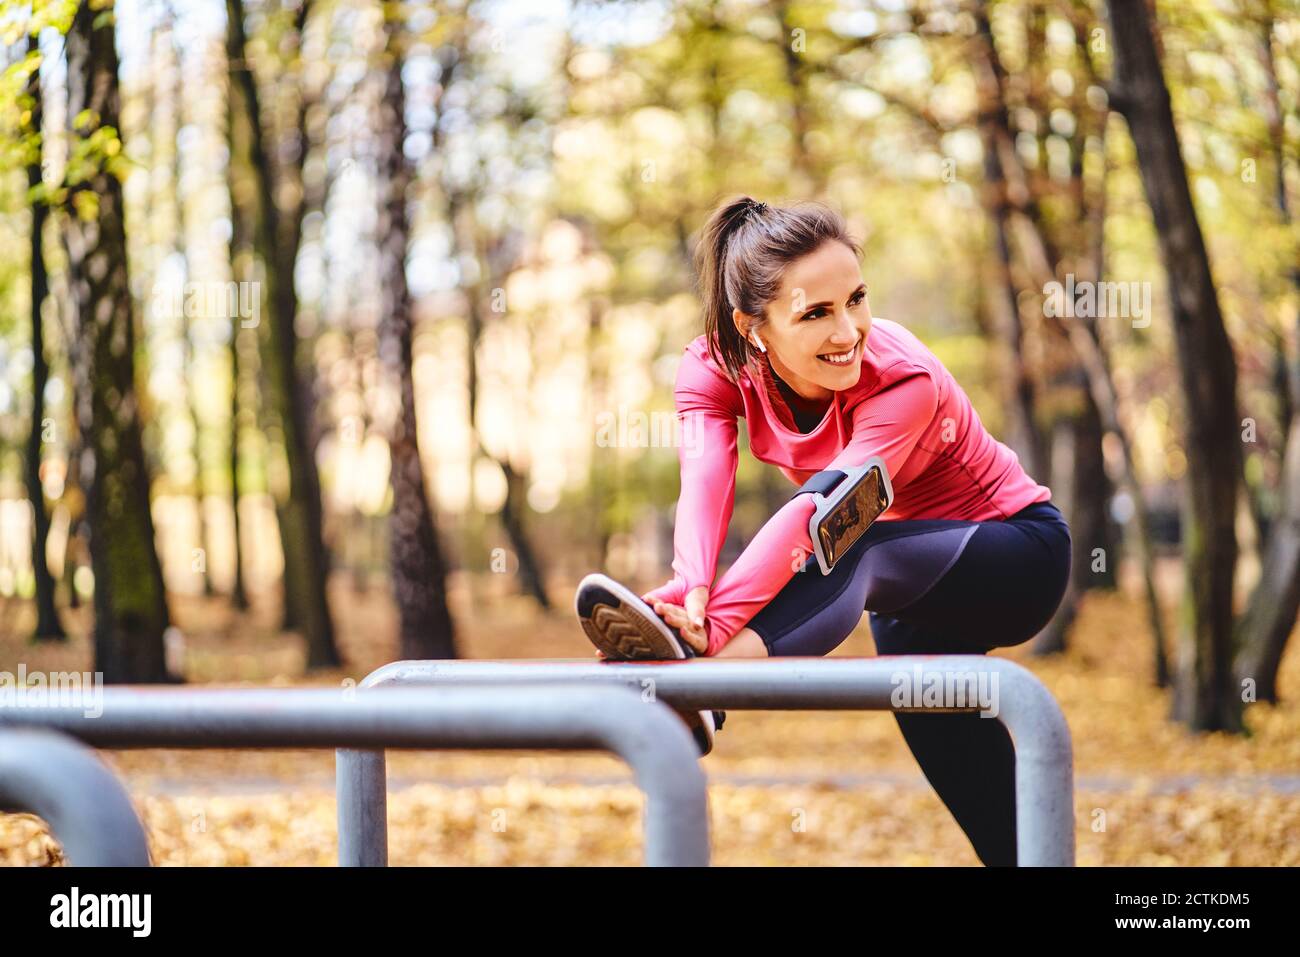 Young female jogger stretching her leg on bicycle stand in autumn forest Stock Photo